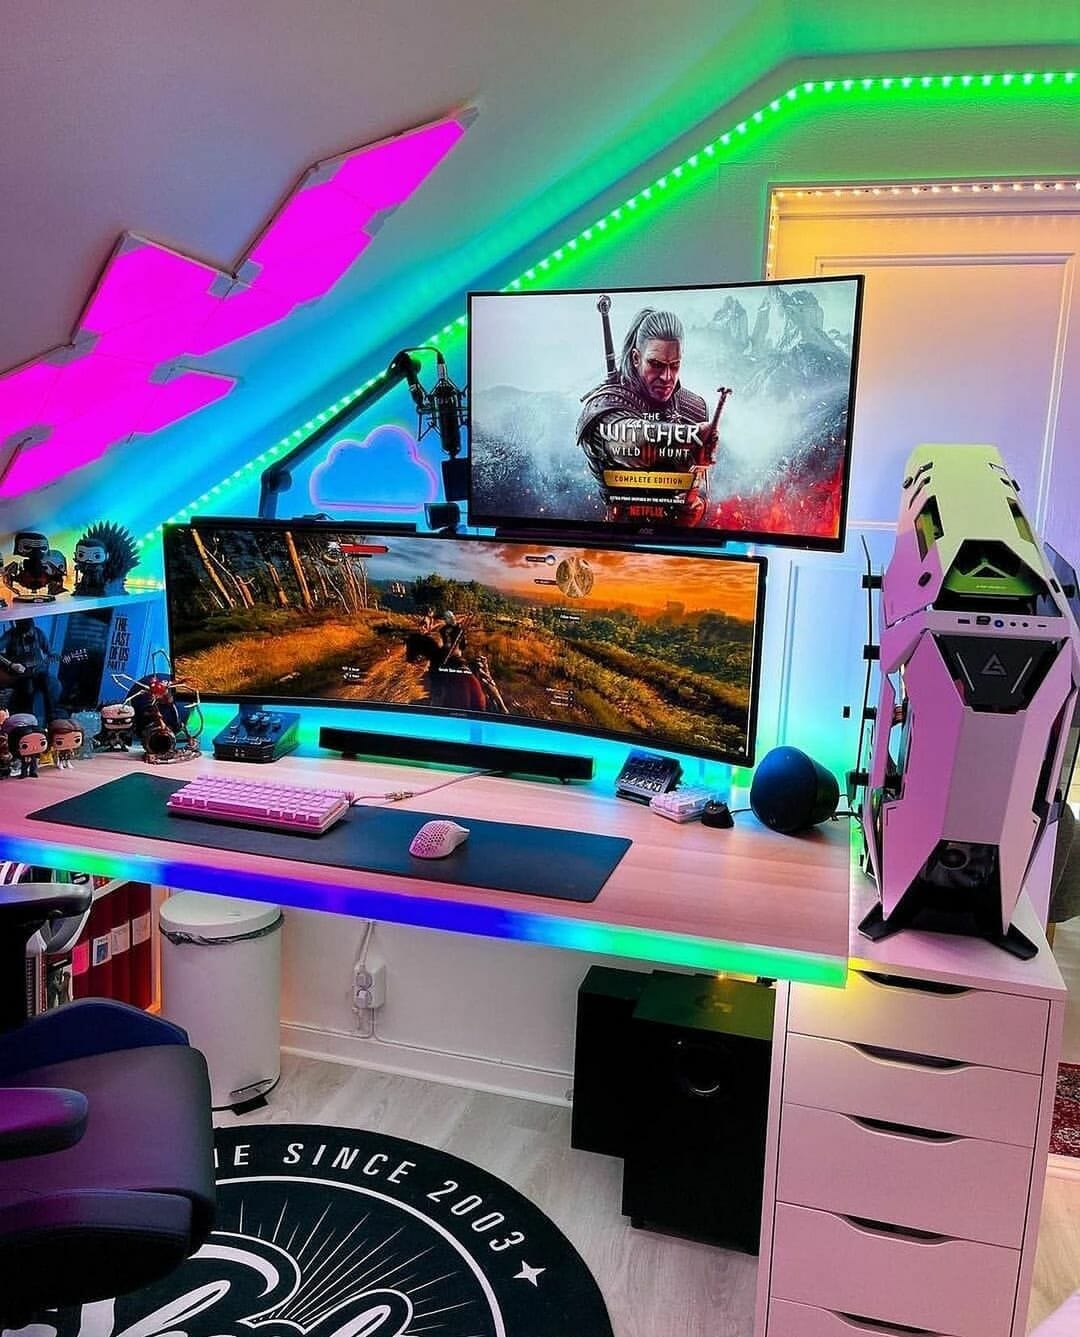 Work / Casual gaming setup (updated). Badly need decoration ideas